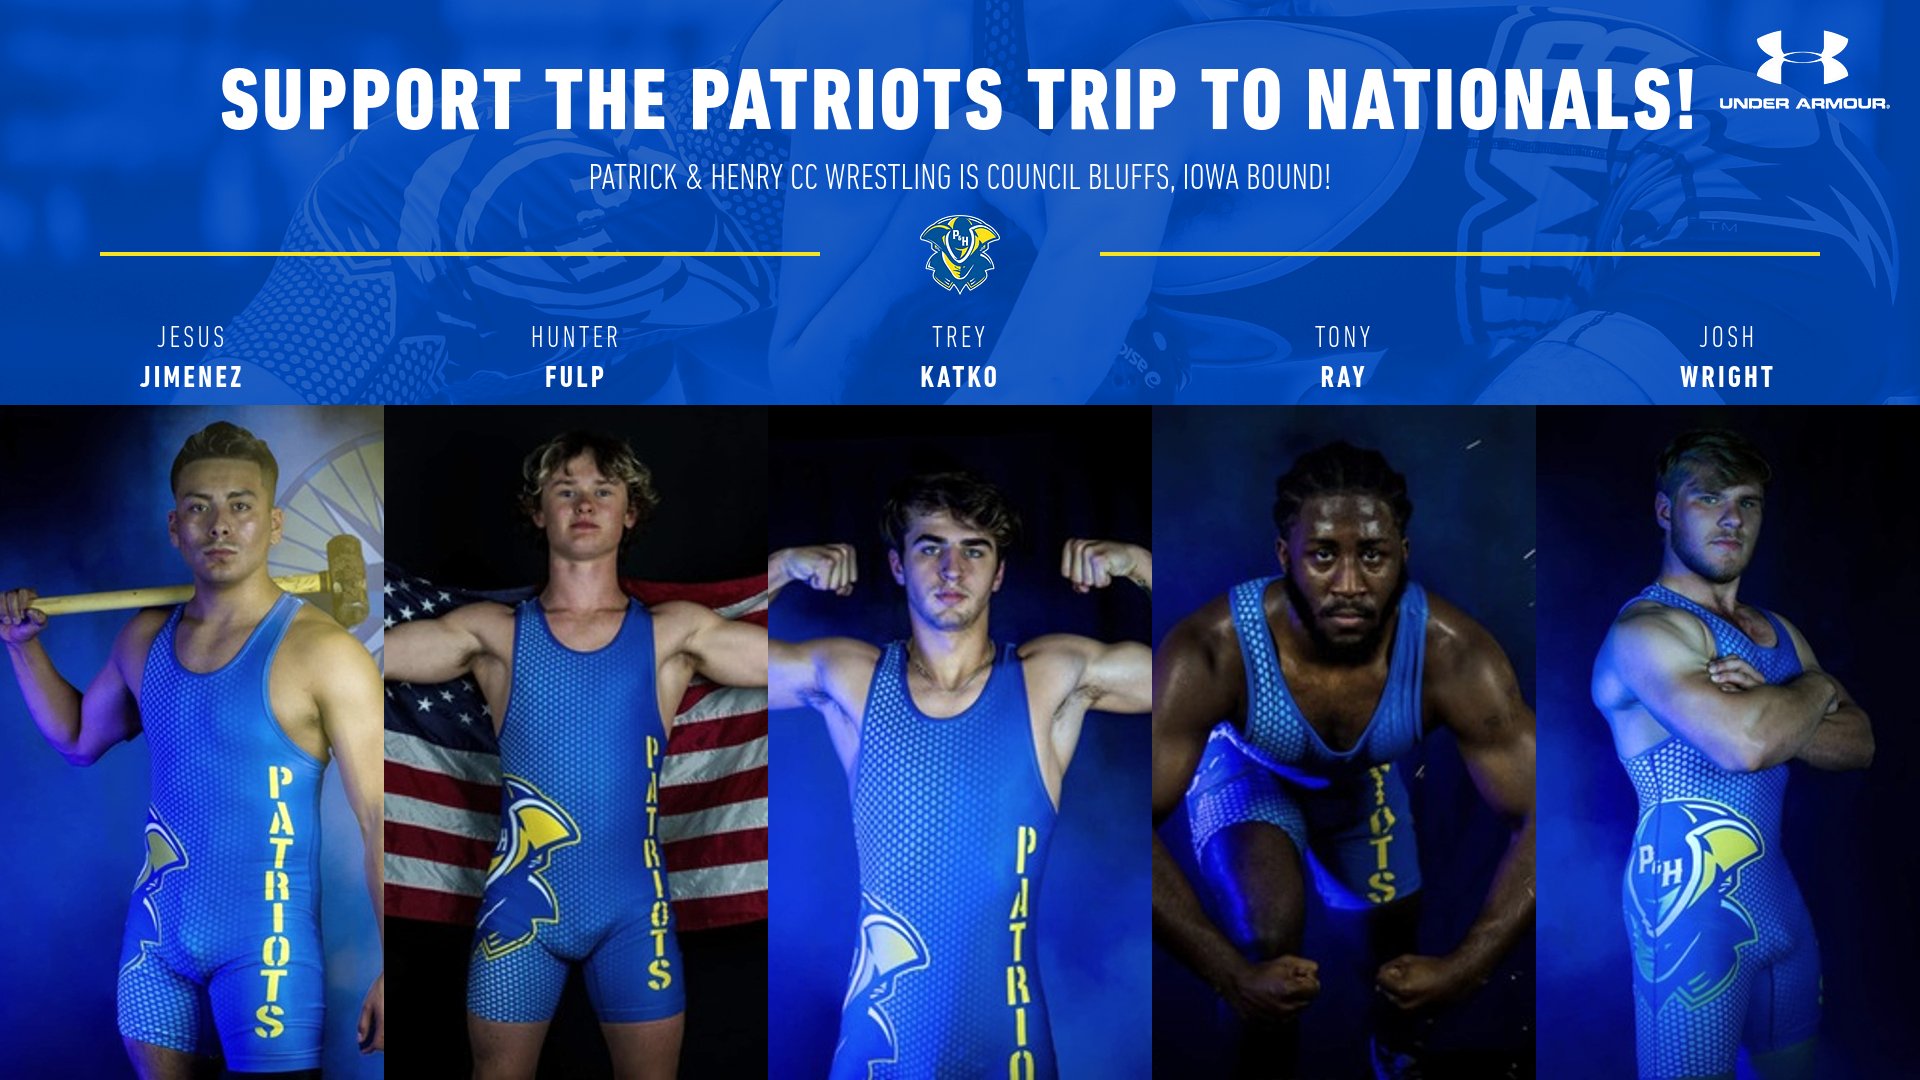 Five P&HCC Wrestlers Qualify for Nationals In Council Bluffs, Iowa - Support the Patriots!